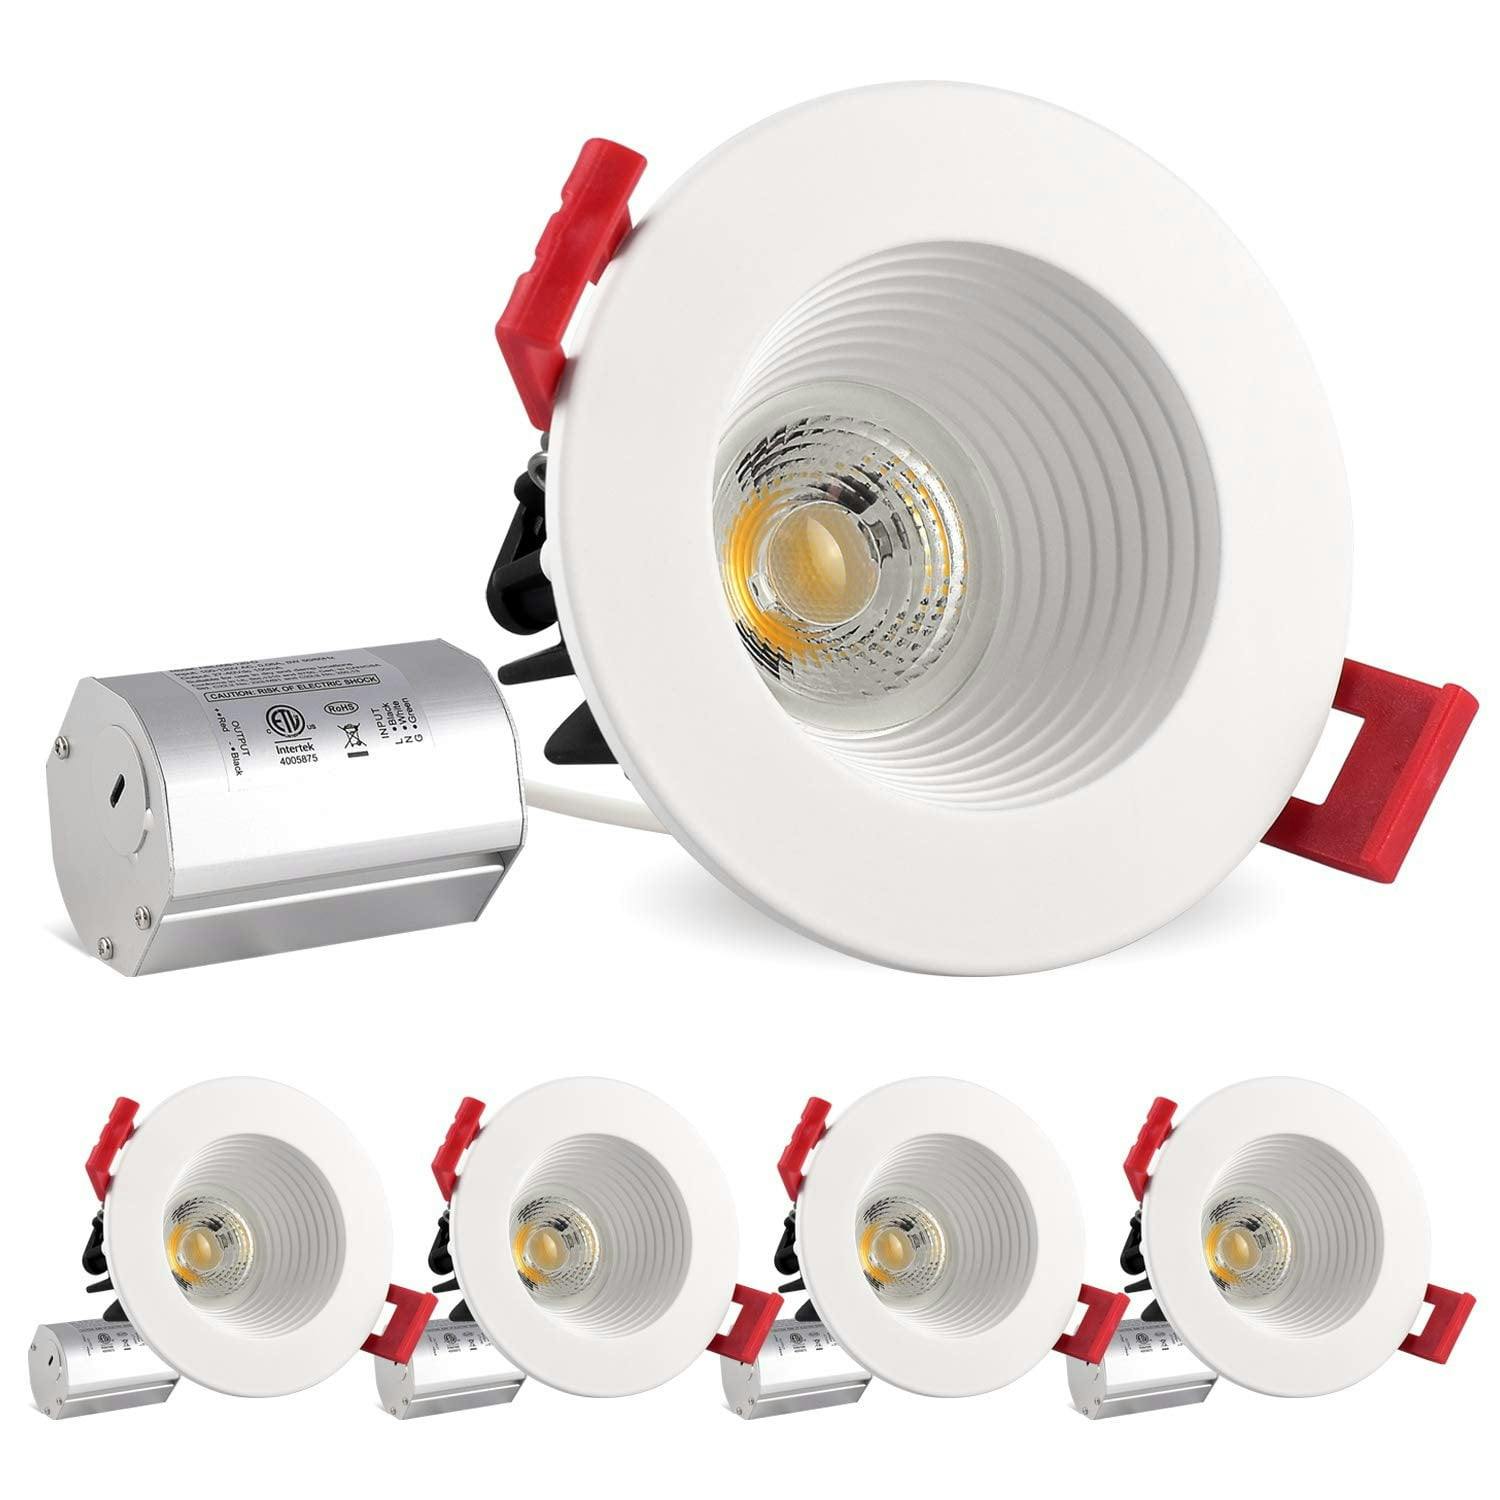 Bright White 2'' Dimmable LED Recessed Lighting Kit for Indoor/Outdoor